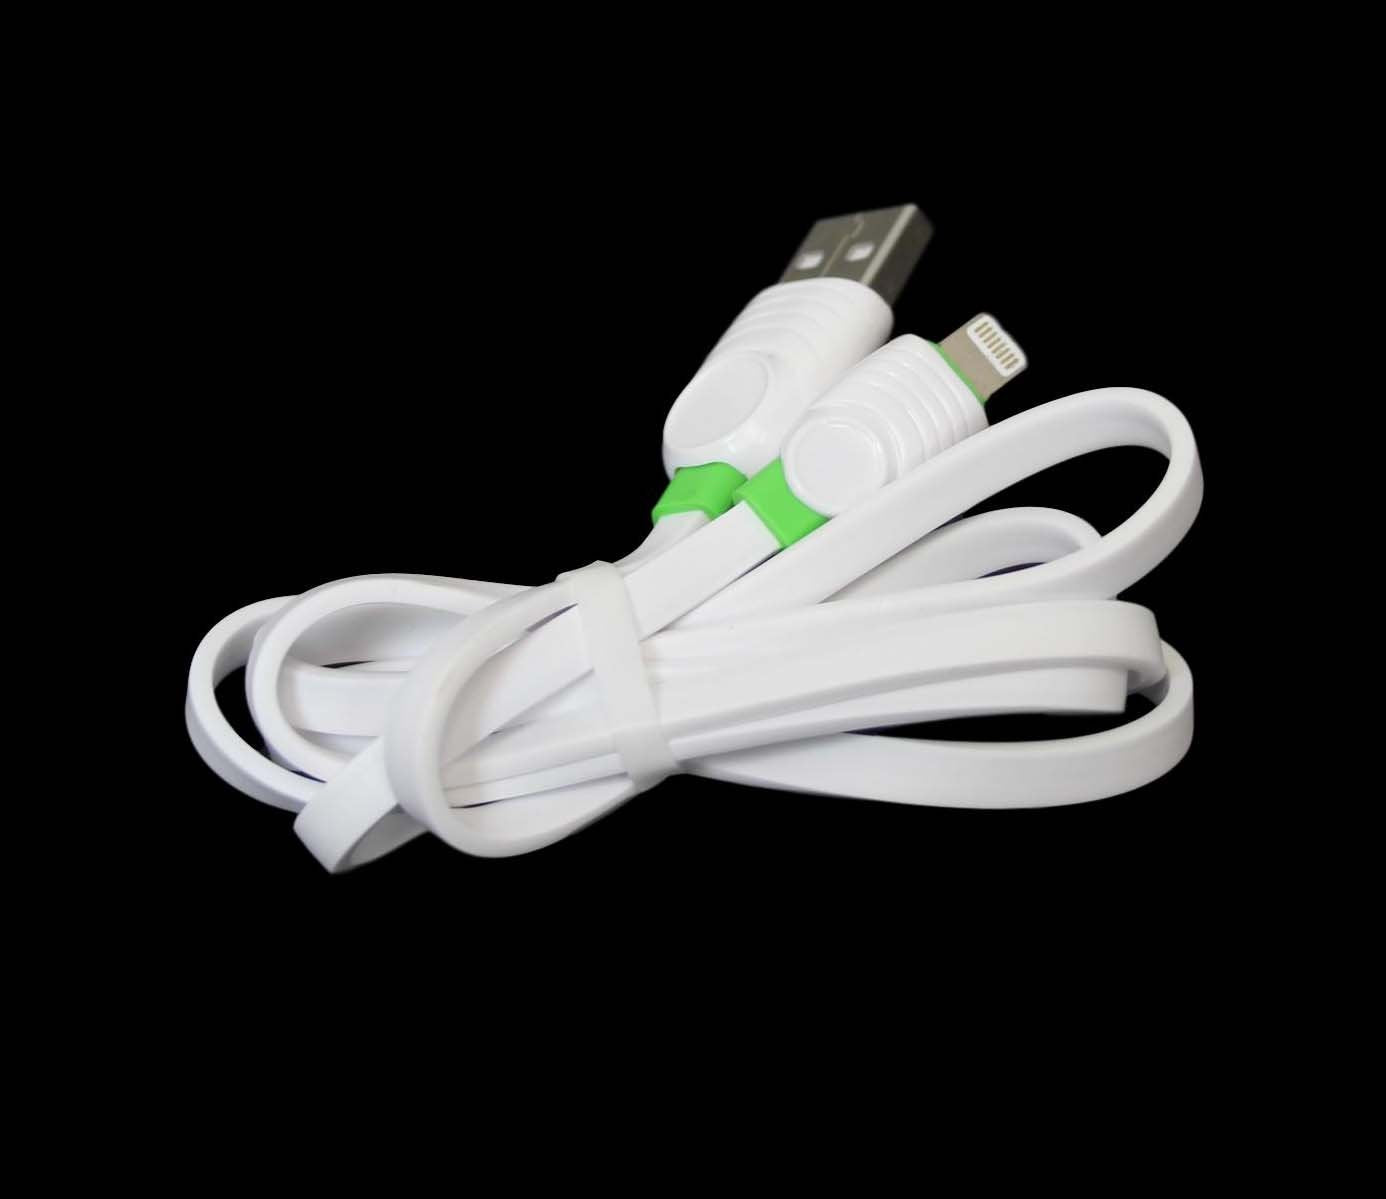 Hongyu Super Charge Cable Super Fast Charge Rapid Charge Durable Design x 1 6390 (Large Letter Rate)